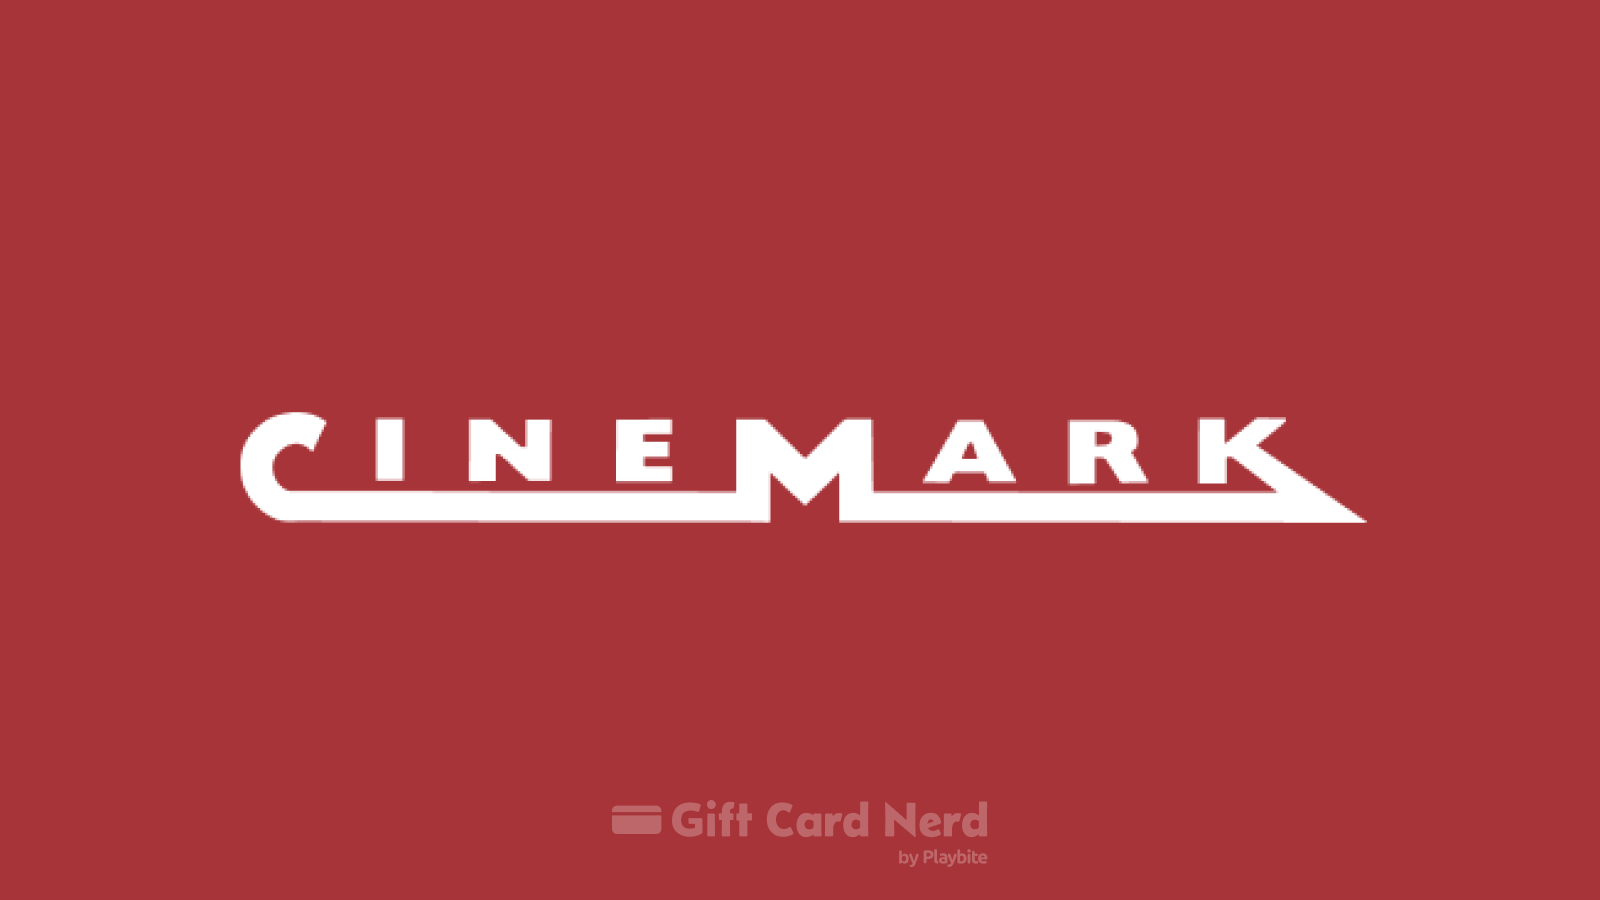 Does Walmart Sell Cinemark Gift Cards?